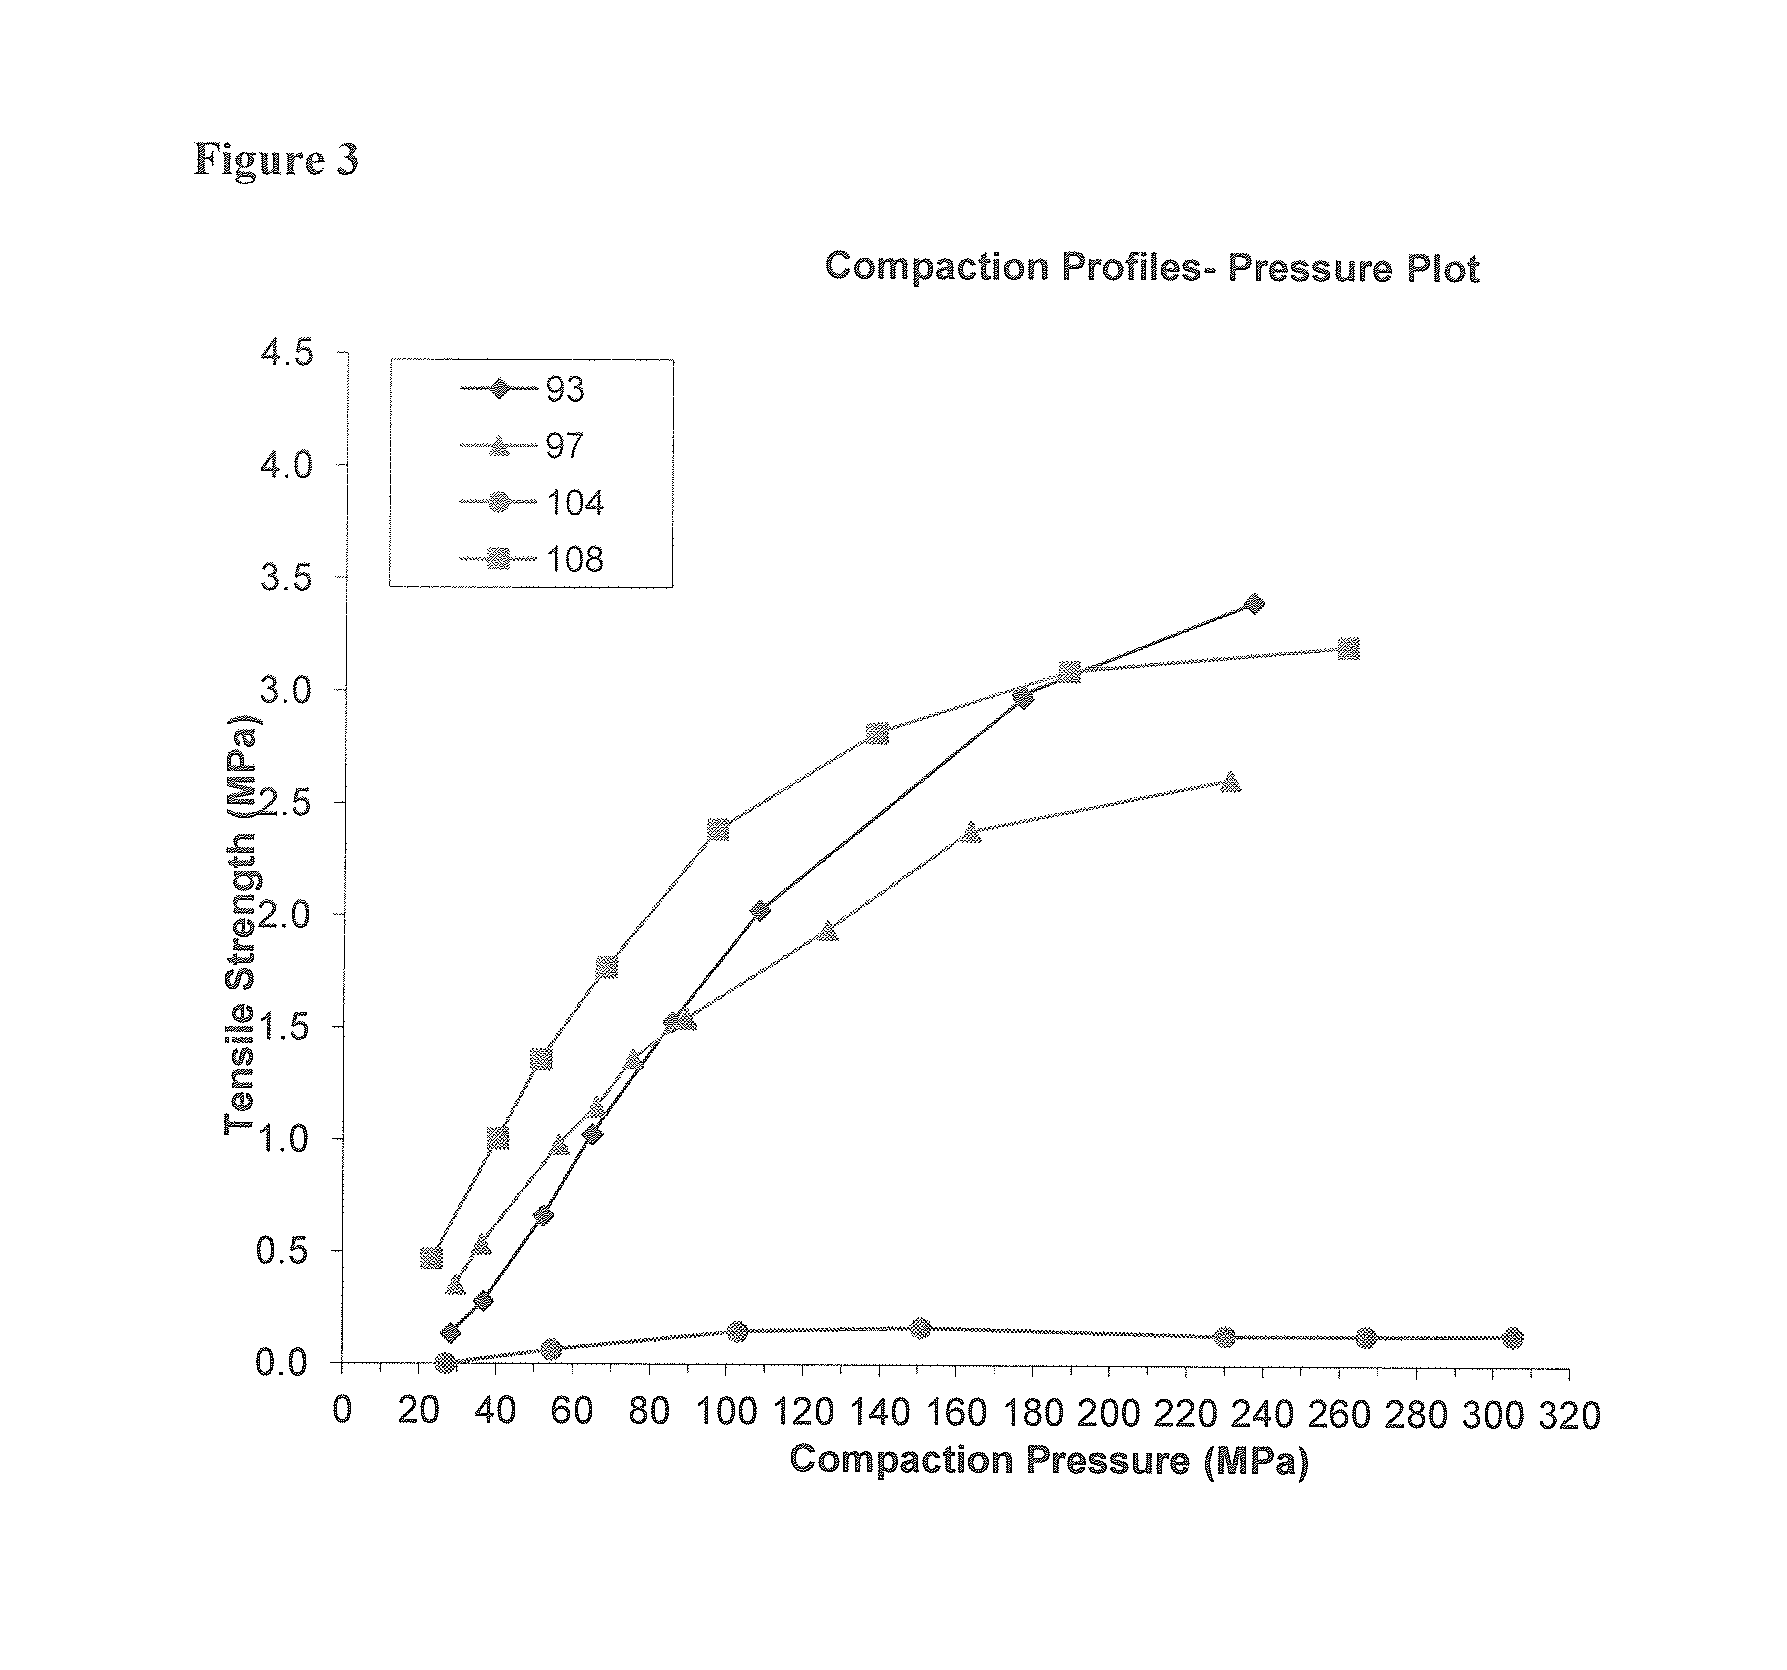 Pharmaceutical compositions containing dimethyl fumarate